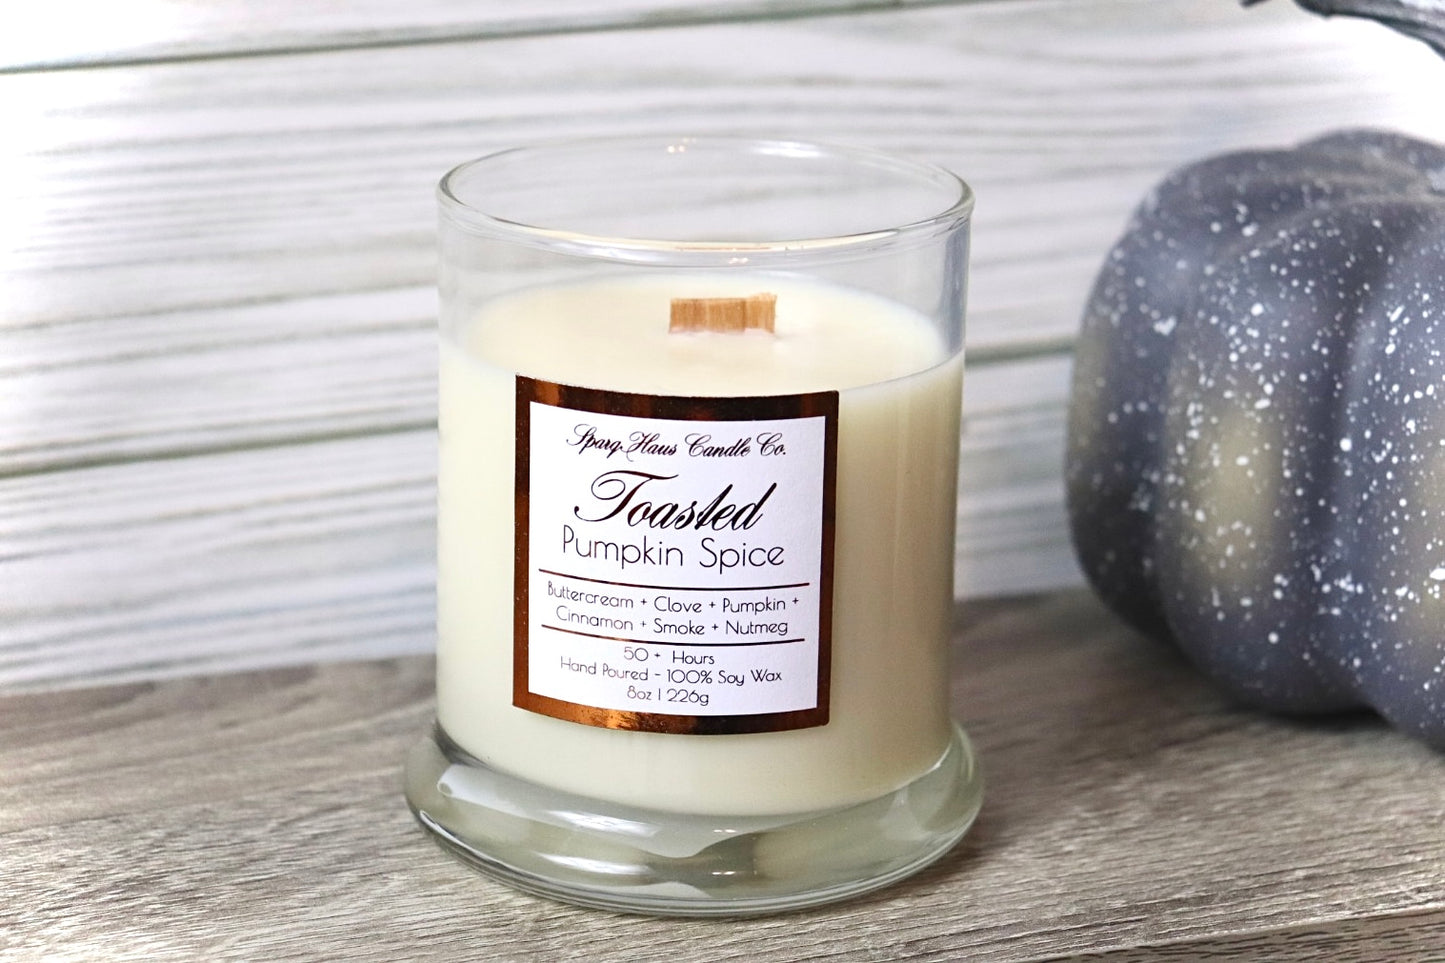 Toasted Pumpkin Spice - wooden wick candle